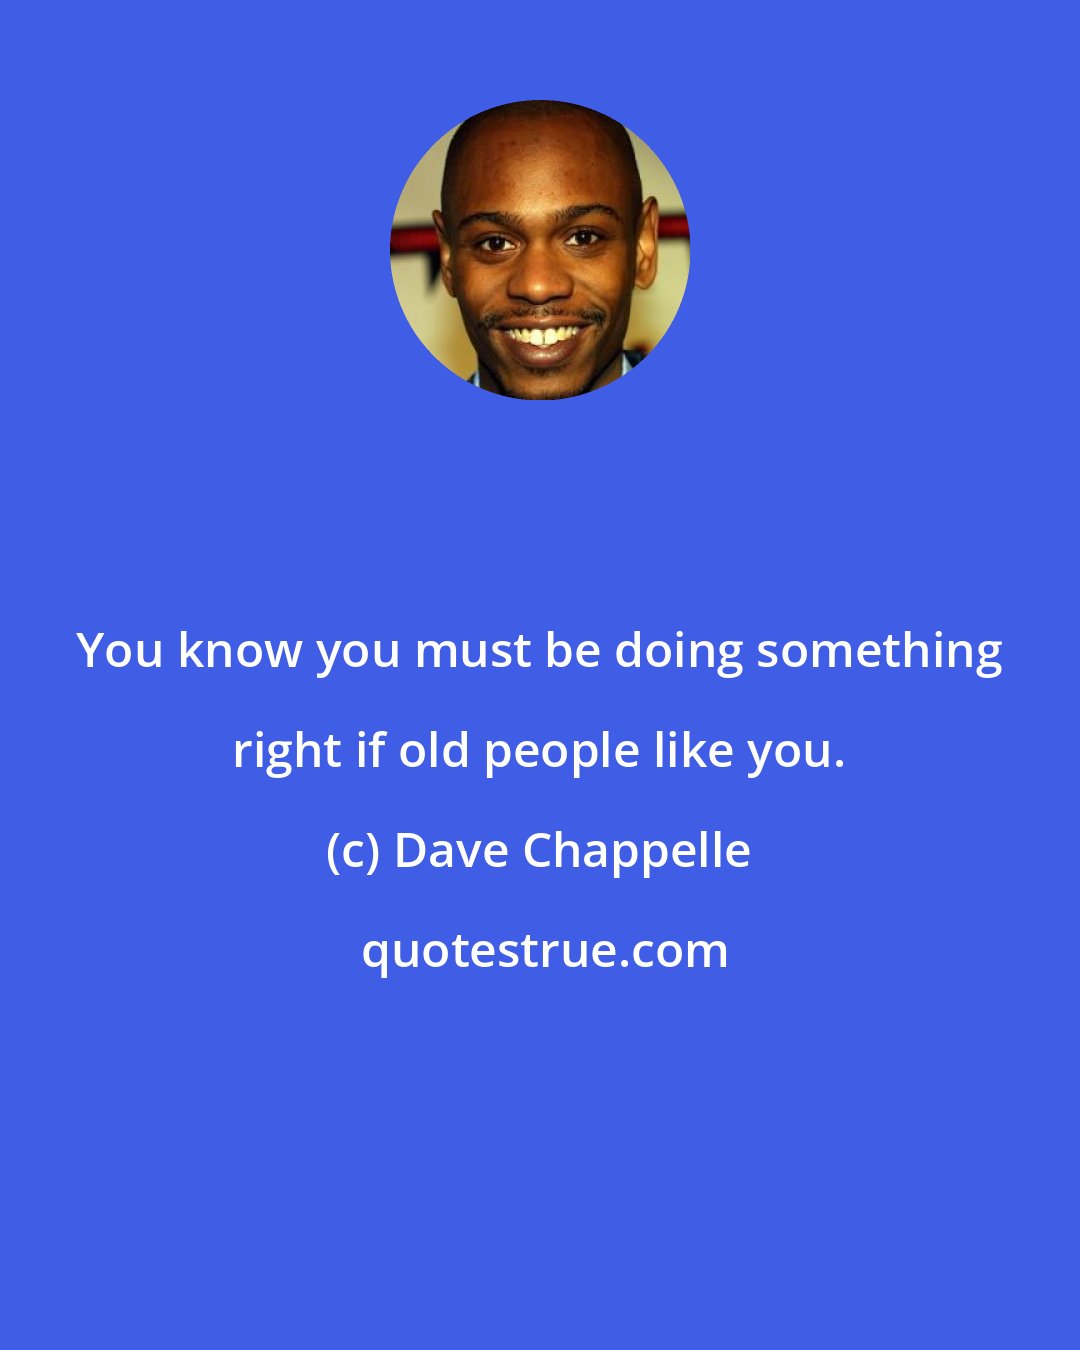 Dave Chappelle: You know you must be doing something right if old people like you.